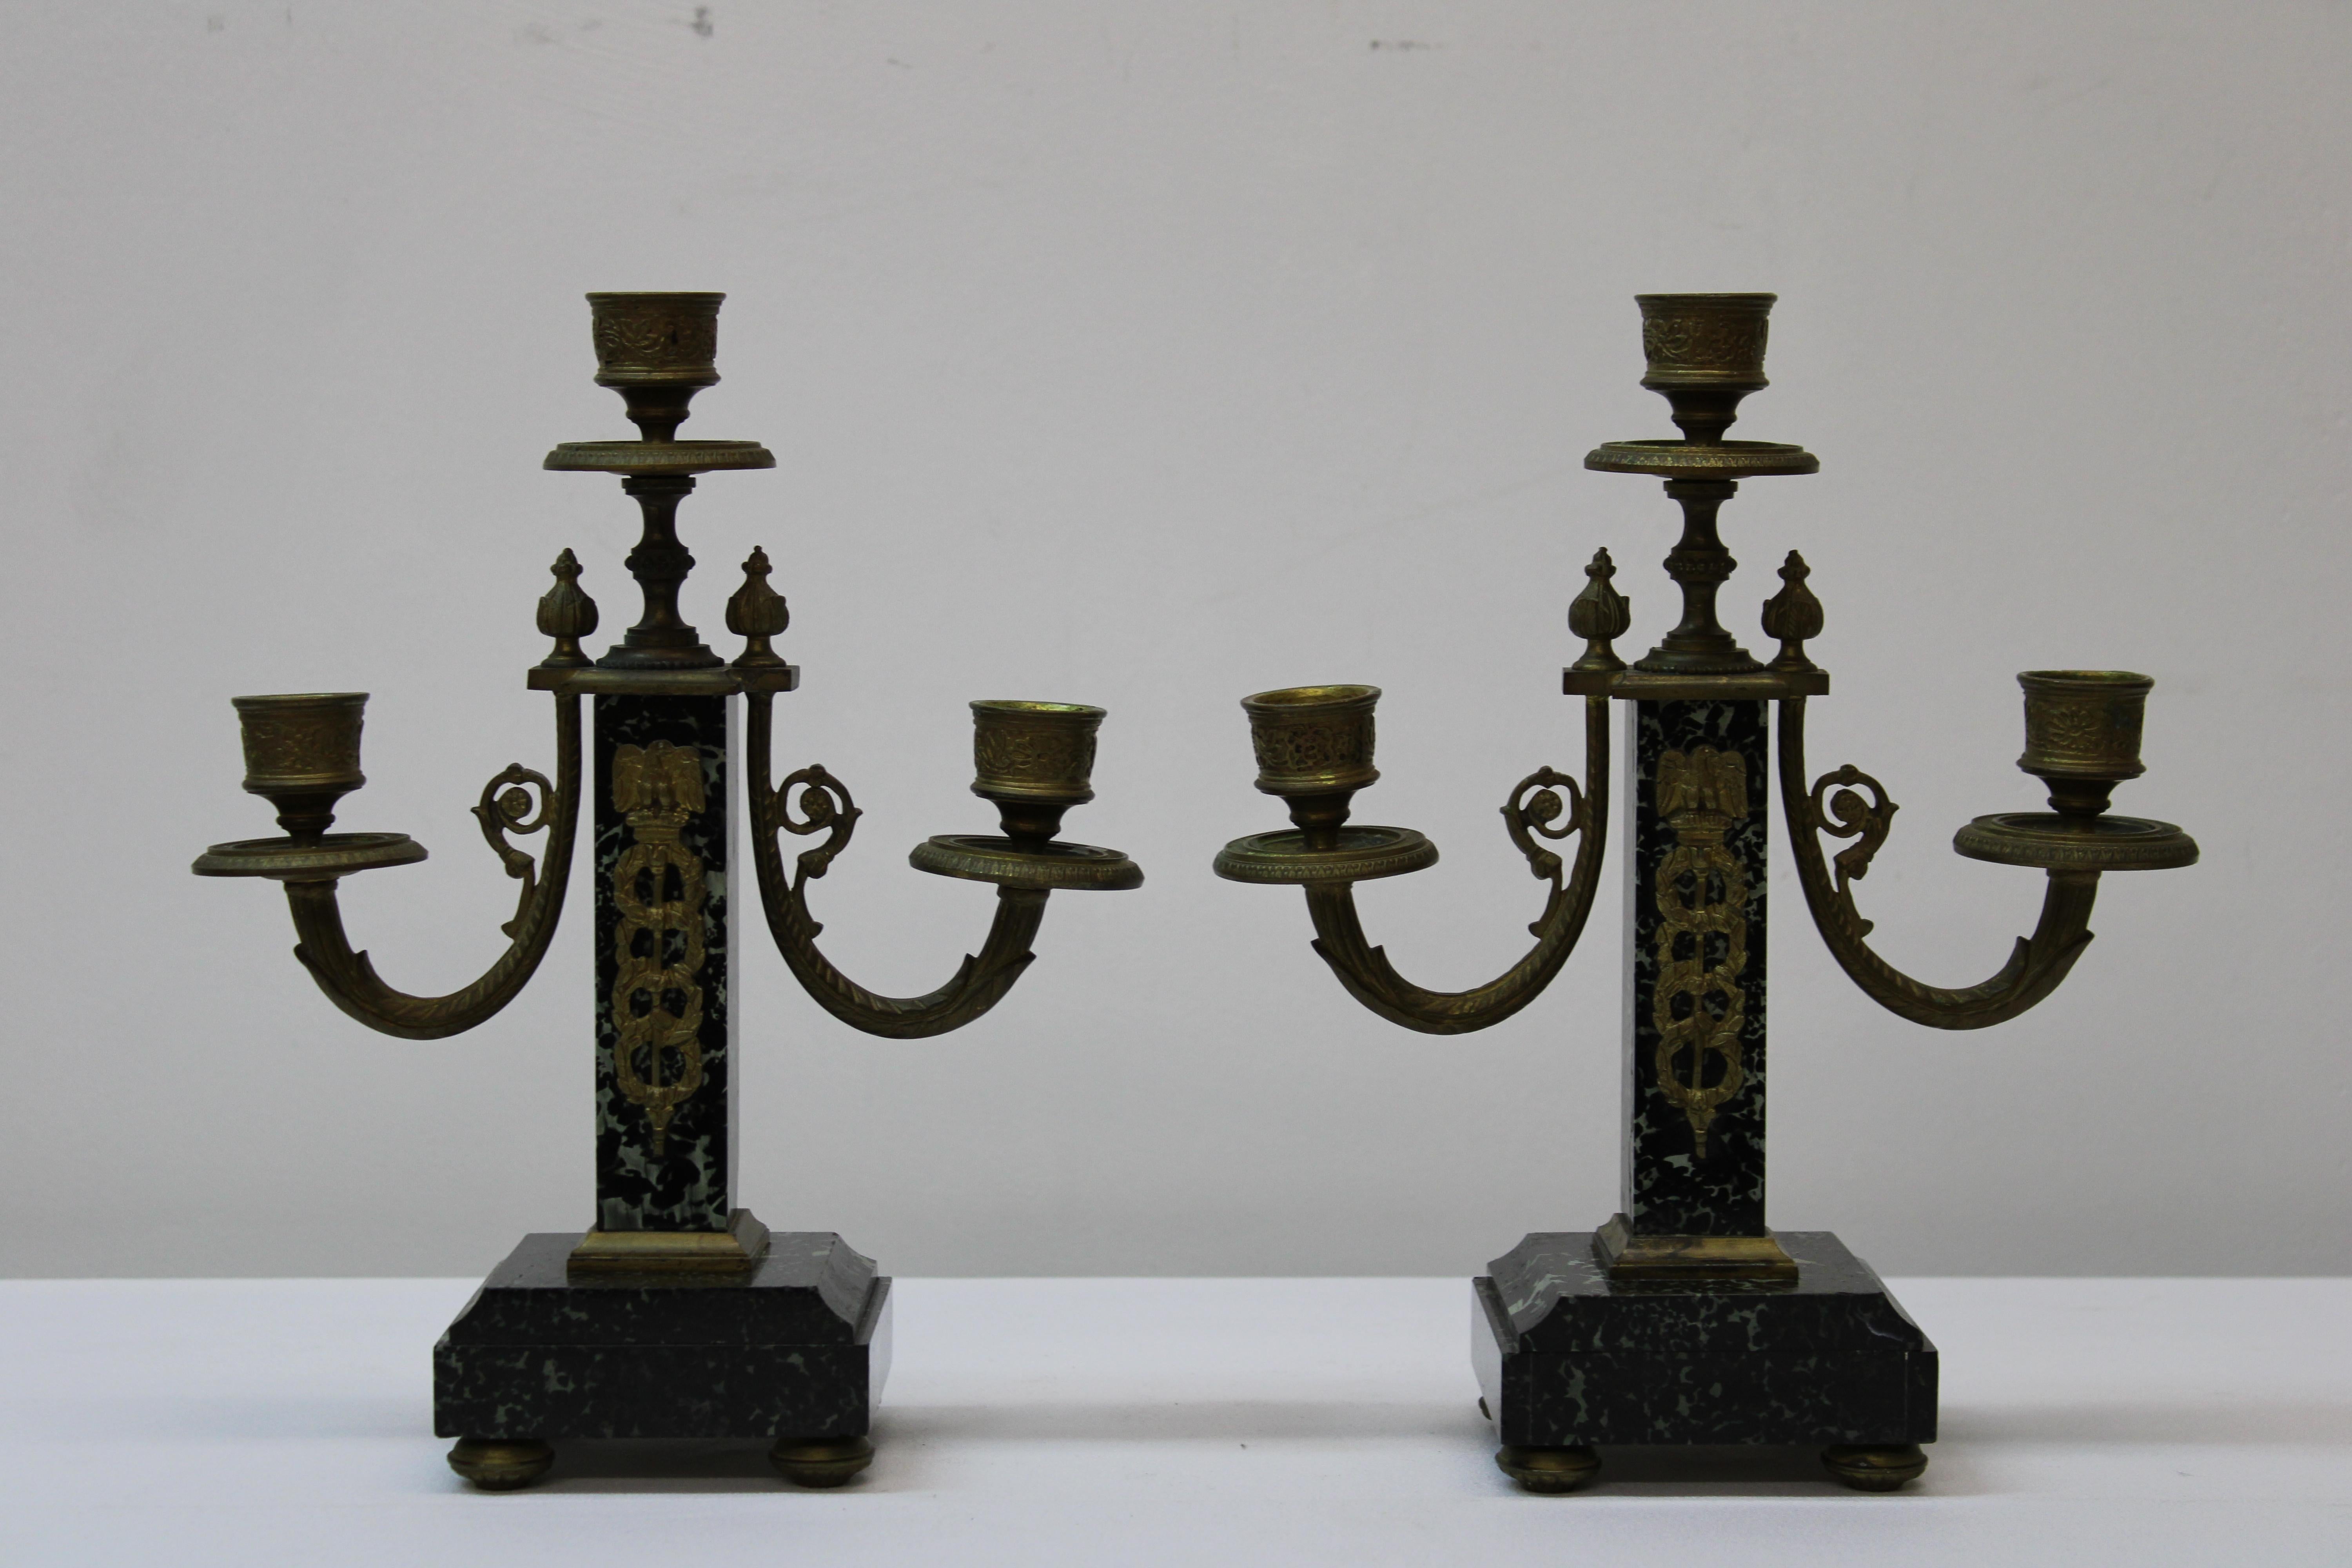 C. 19th century

French empire style brass & marble candelabra's.